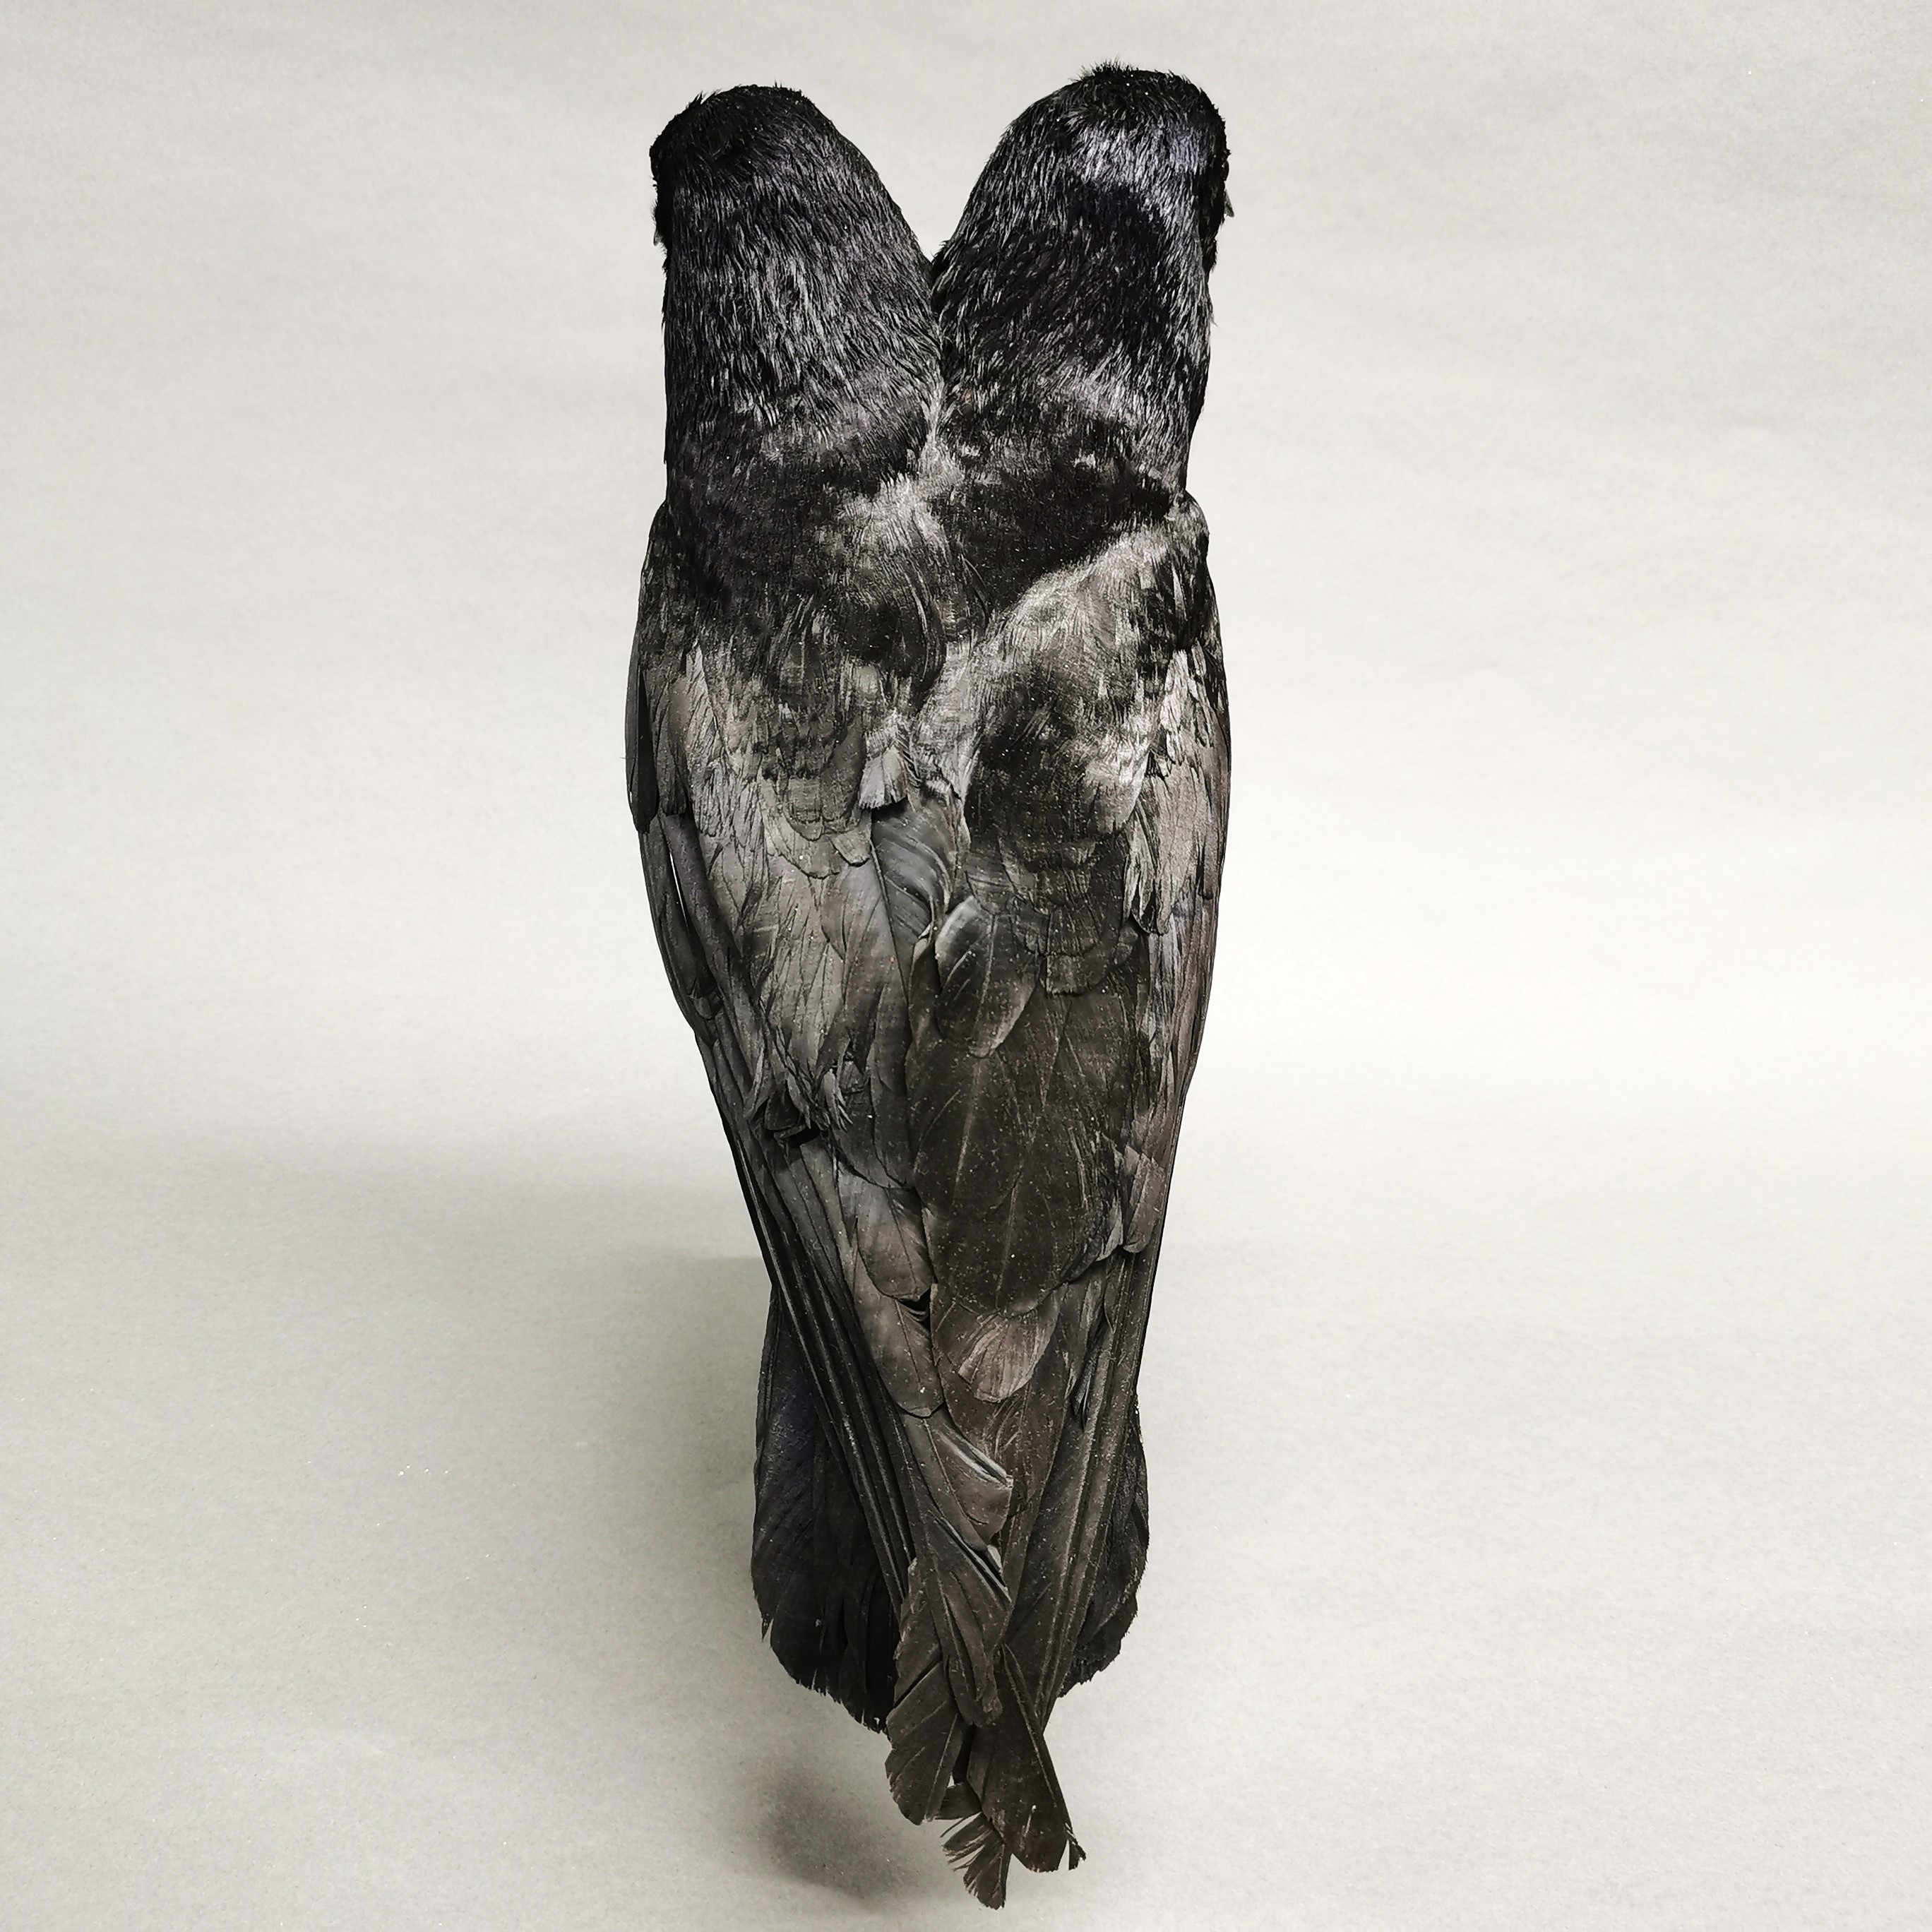 Taxidermy interest: Freak “Two-Headed Rook”, an interesting full mount rook with additional head. - Image 3 of 4